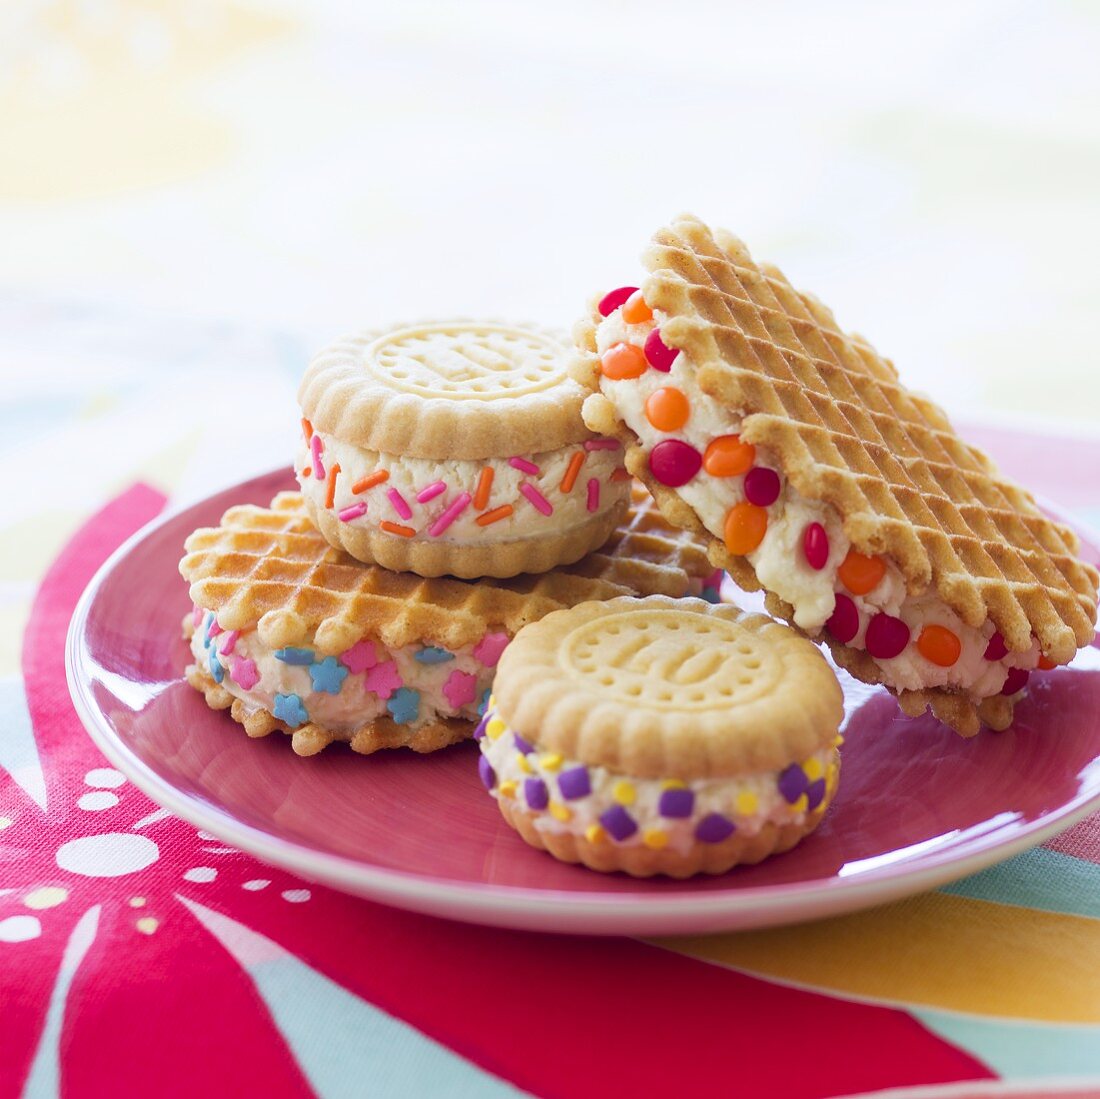 Assorted Ice Cream Sandwiches on a Pink Dish